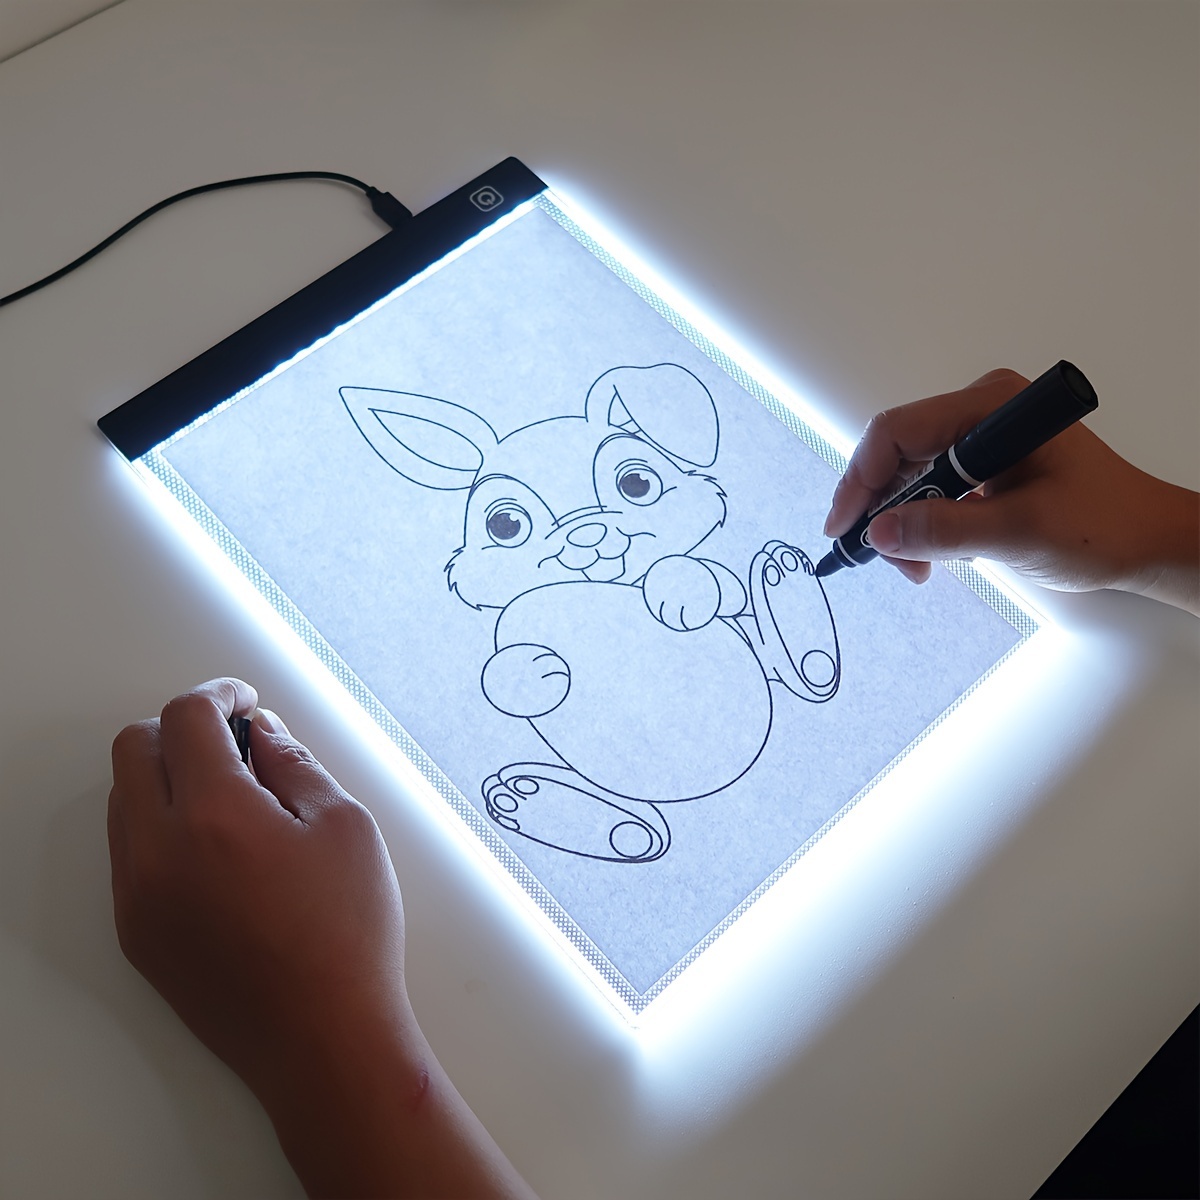 LED Electronic Whiteboard A4 light Pad Drawing Tablet Tracing Pad Sketch  Book Blank Canvas for Painting Watercolor Acrylic Paint